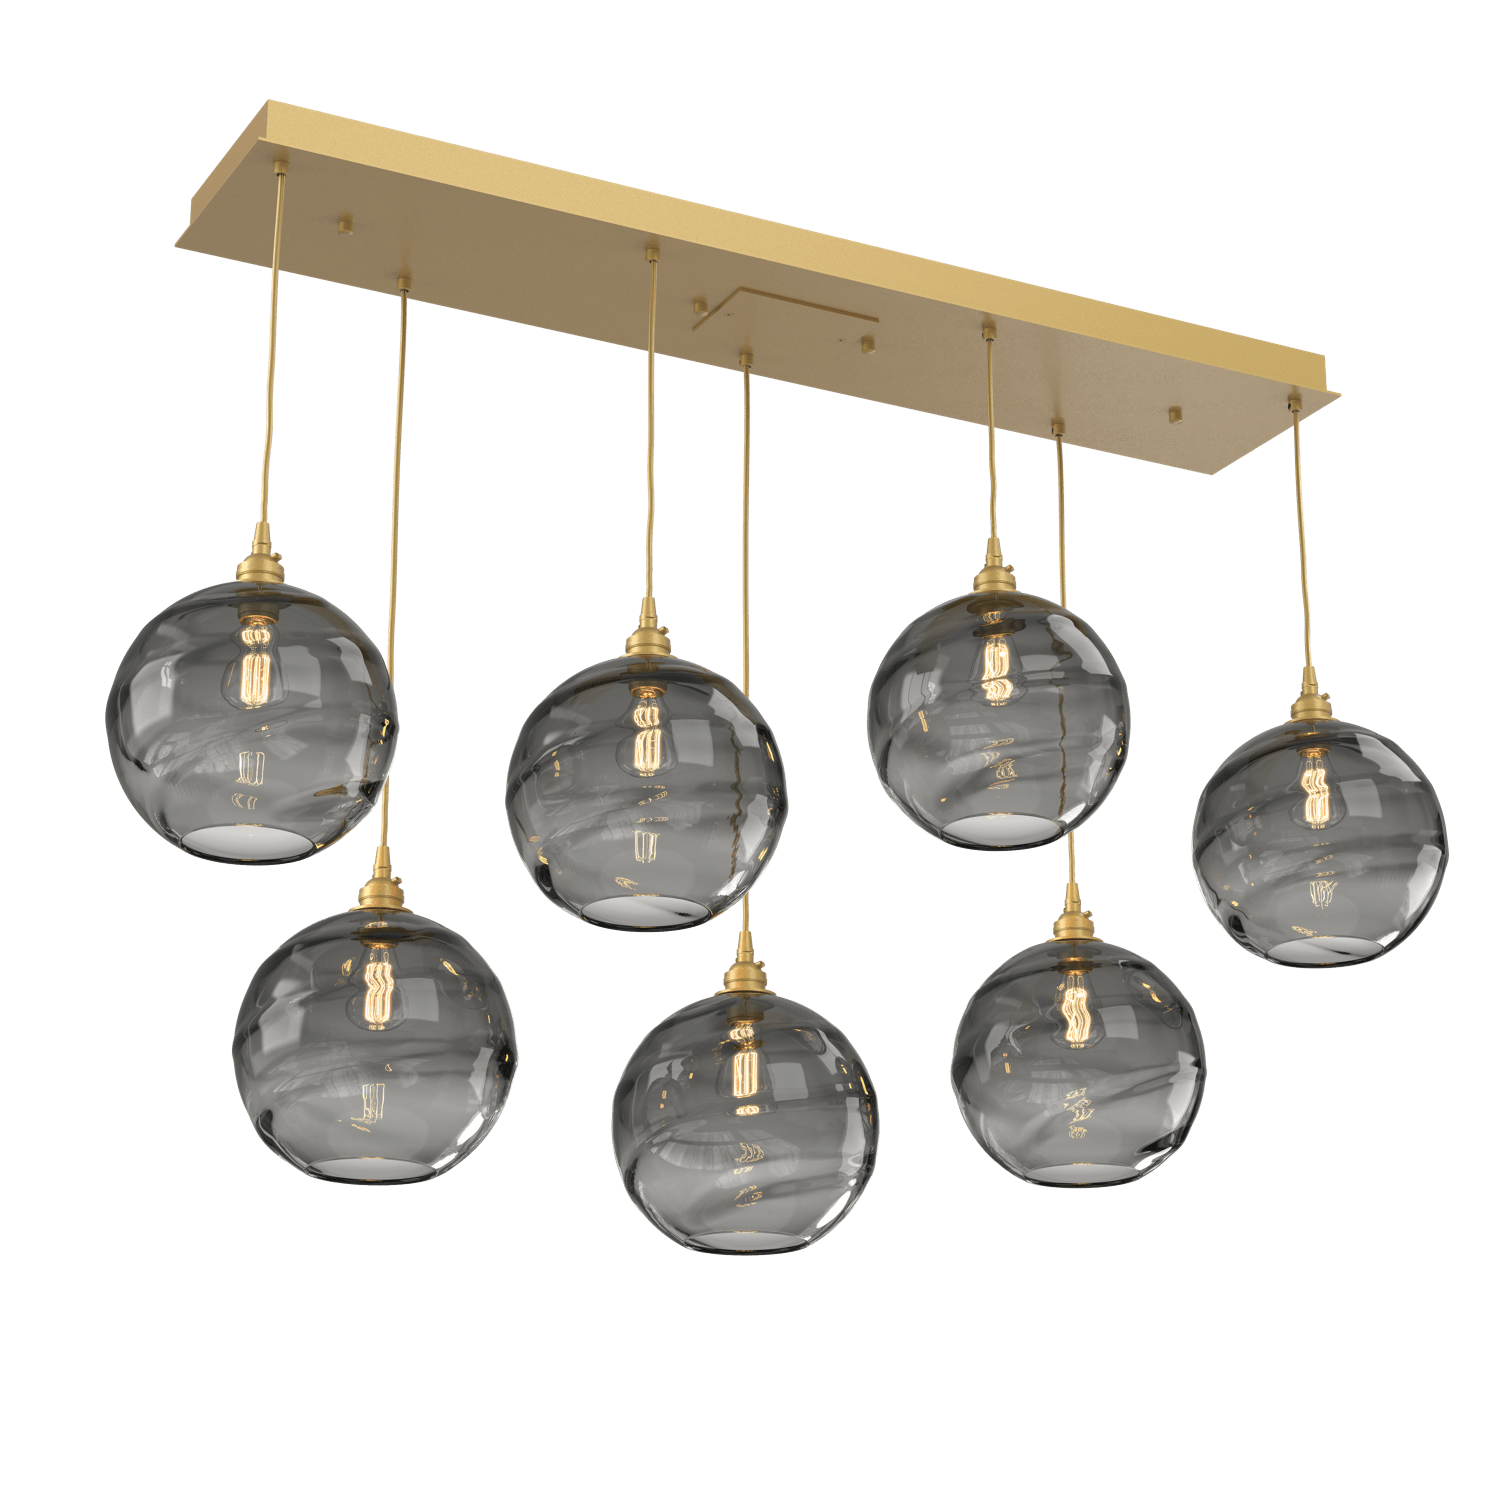 PLB0047-07-GB-OS-Hammerton-Studio-Optic-Blown-Glass-Terra-7-light-linear-pendant-chandelier-with-gilded-brass-finish-and-optic-smoke-blown-glass-shades-and-incandescent-lamping